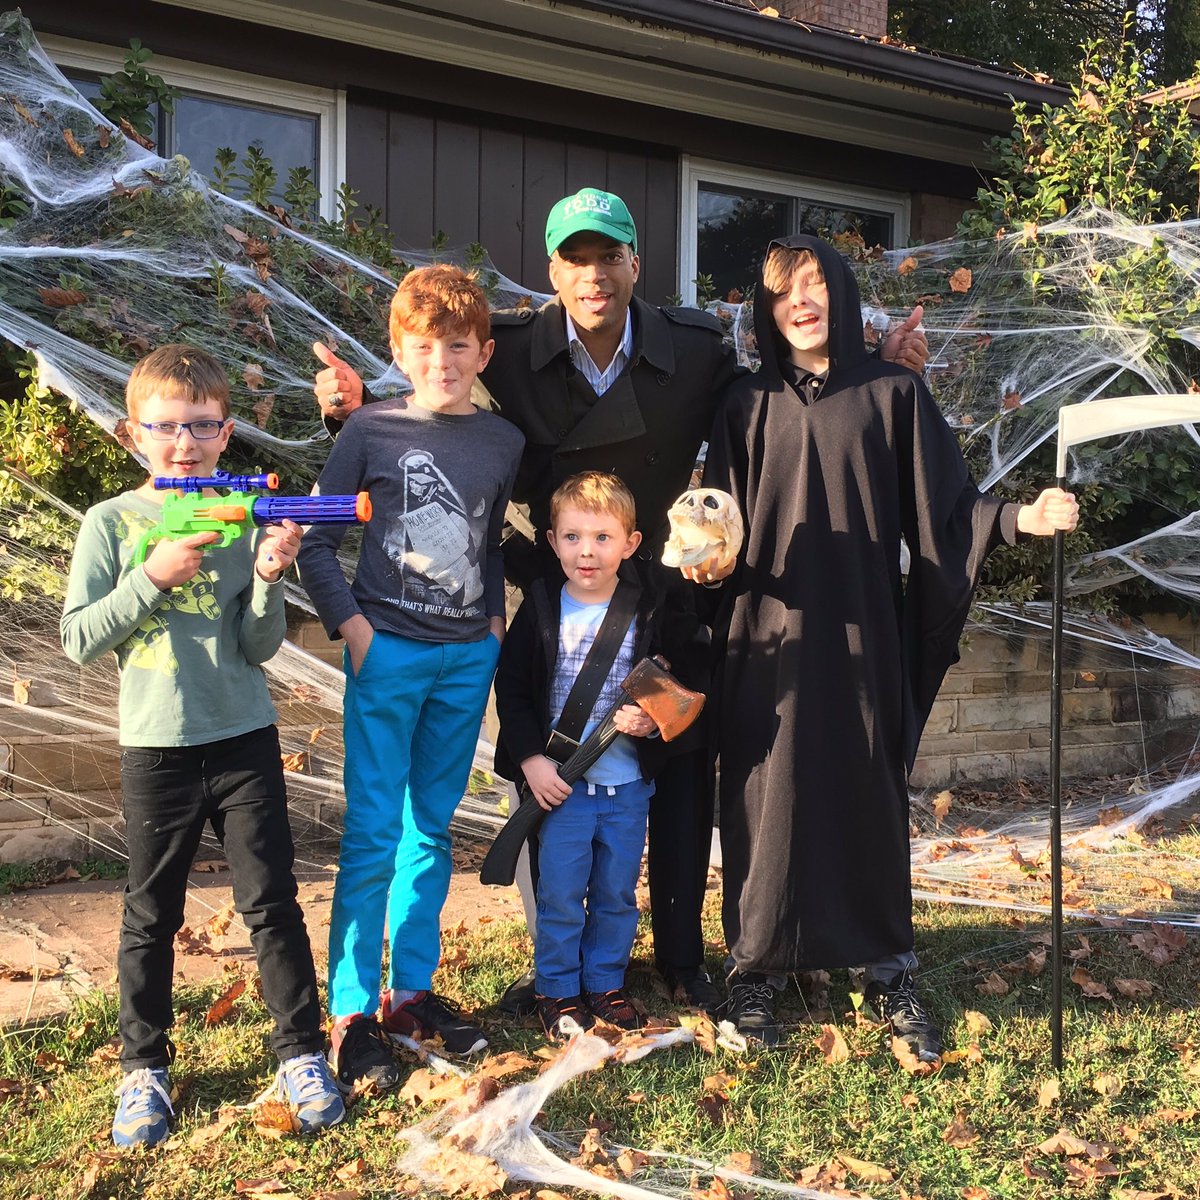 When knocking on doors on Halloween you bump into lots of happy kids! #ColonialVillage #Ward4Proud